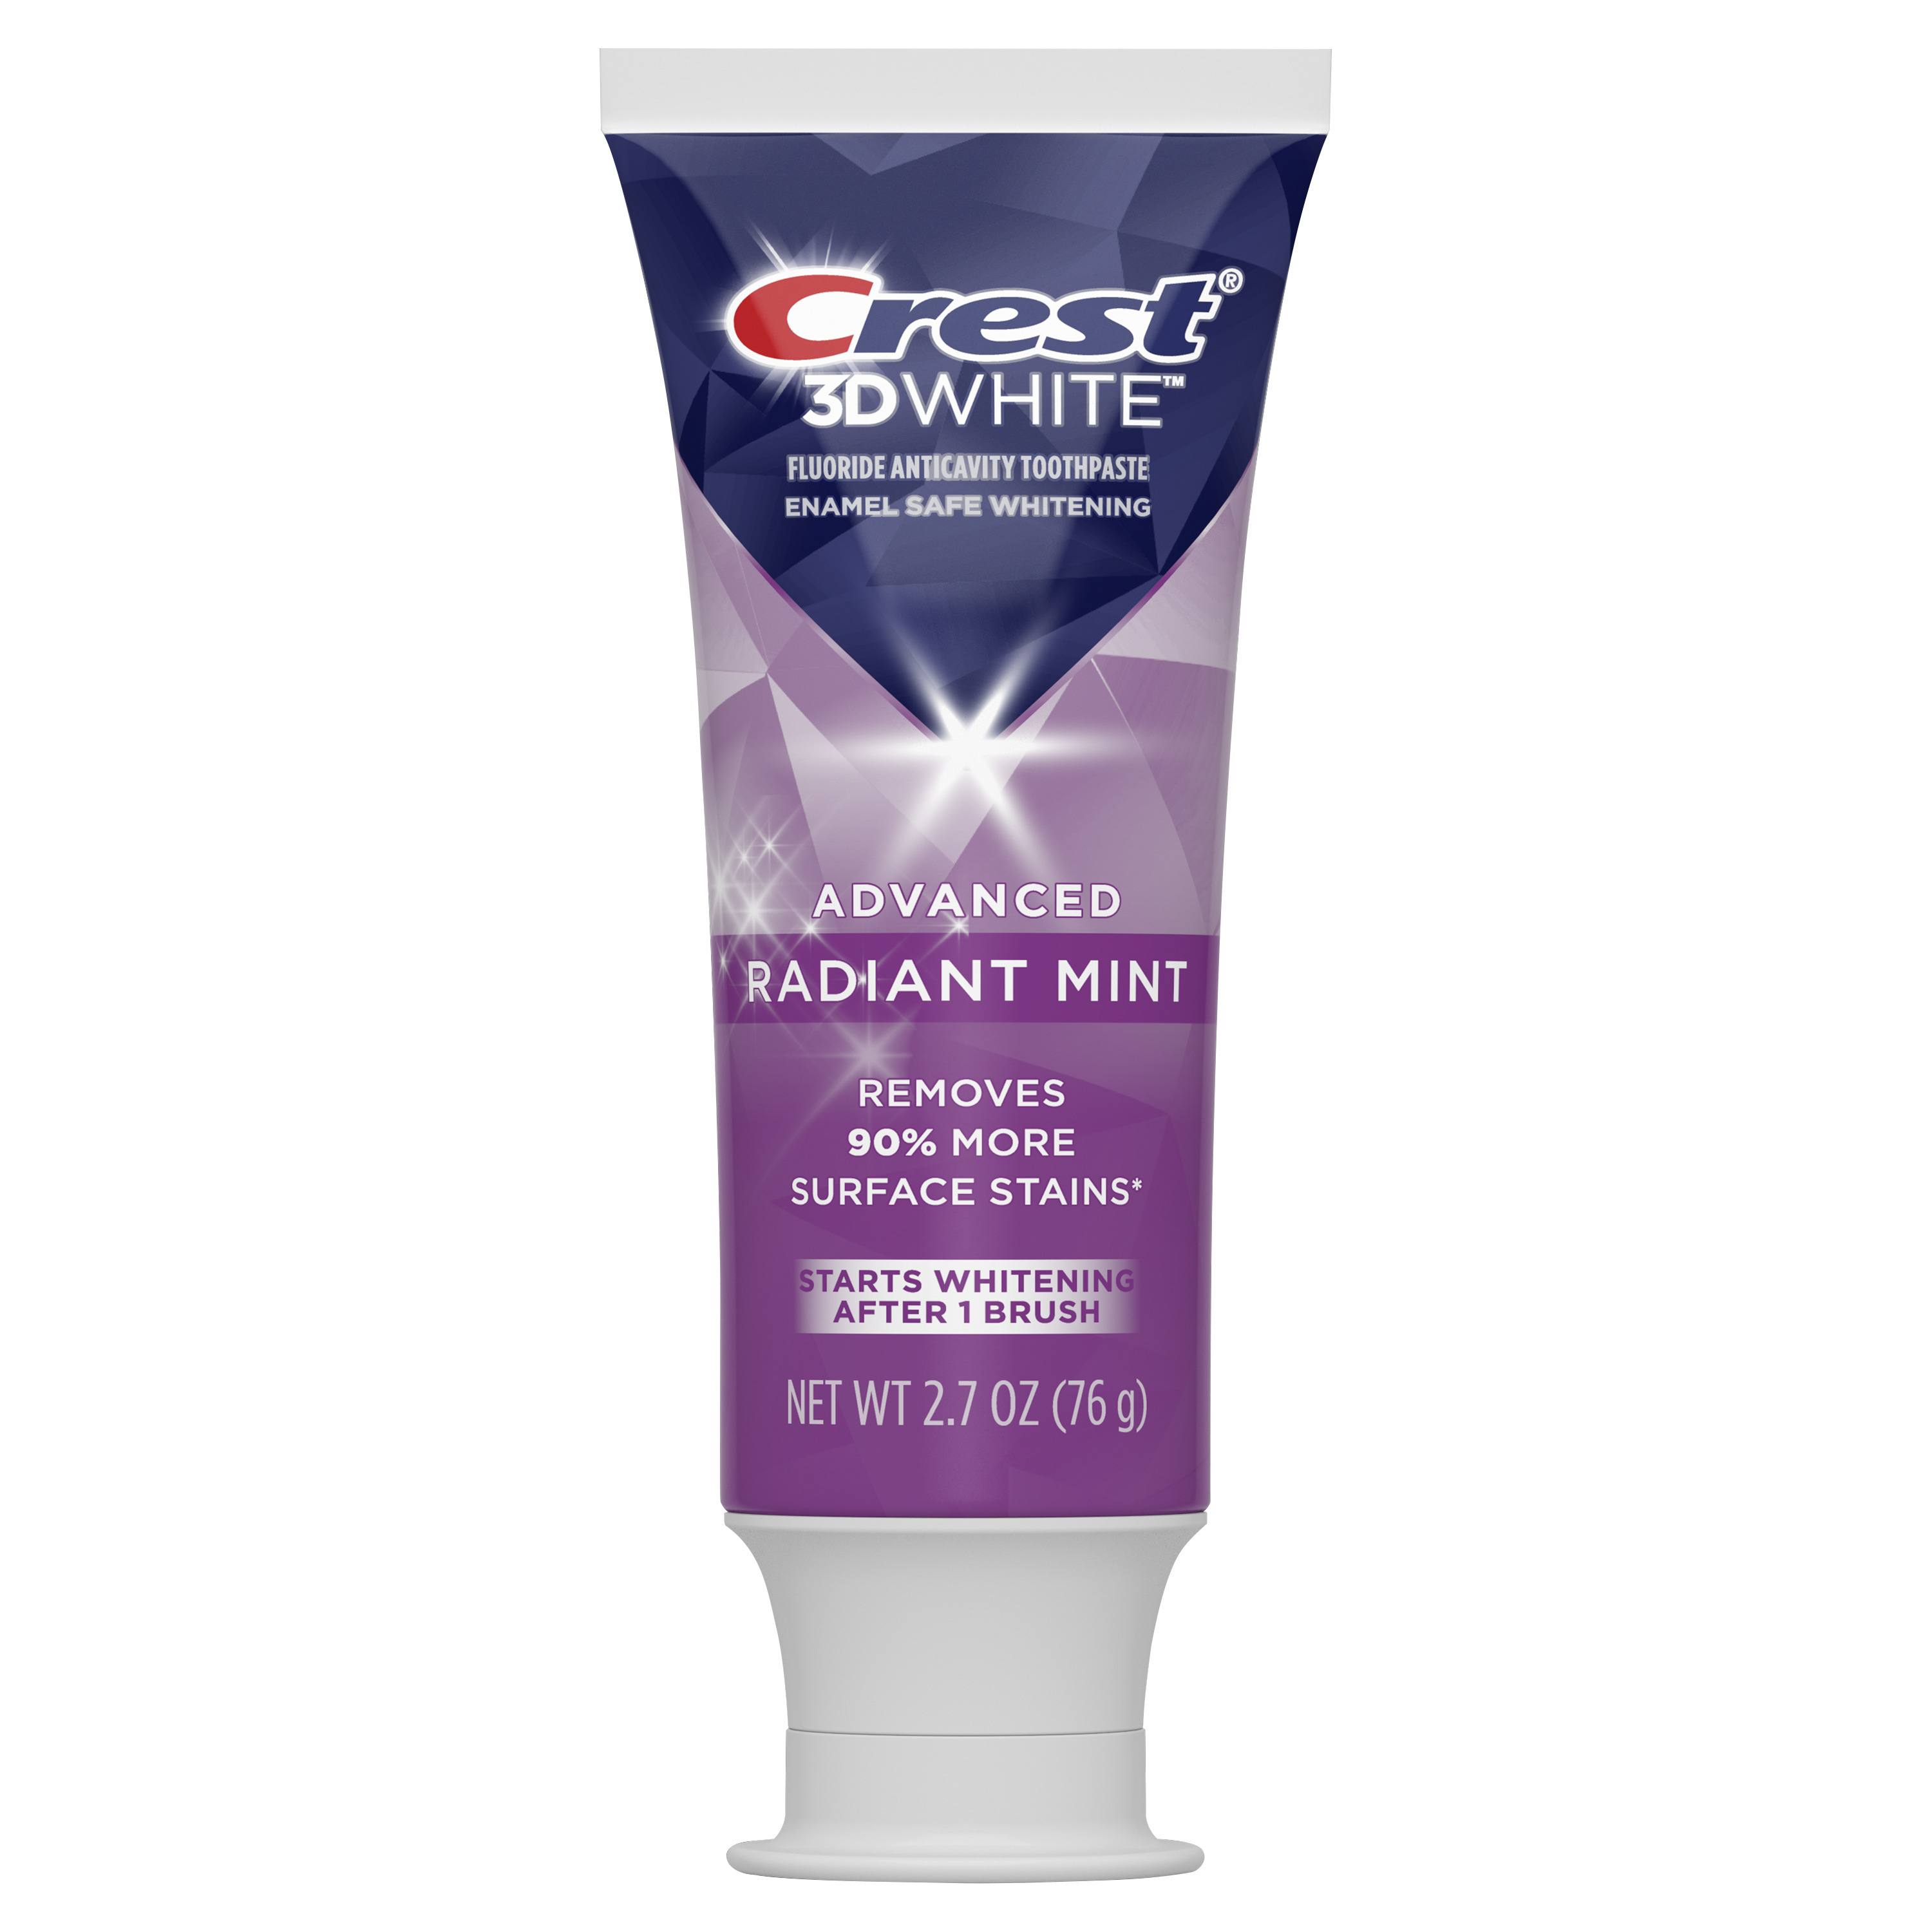 Crest 3D White Advanced Radiant Mint Whitening Toothpaste, 2.7 oz - image 3 of 9